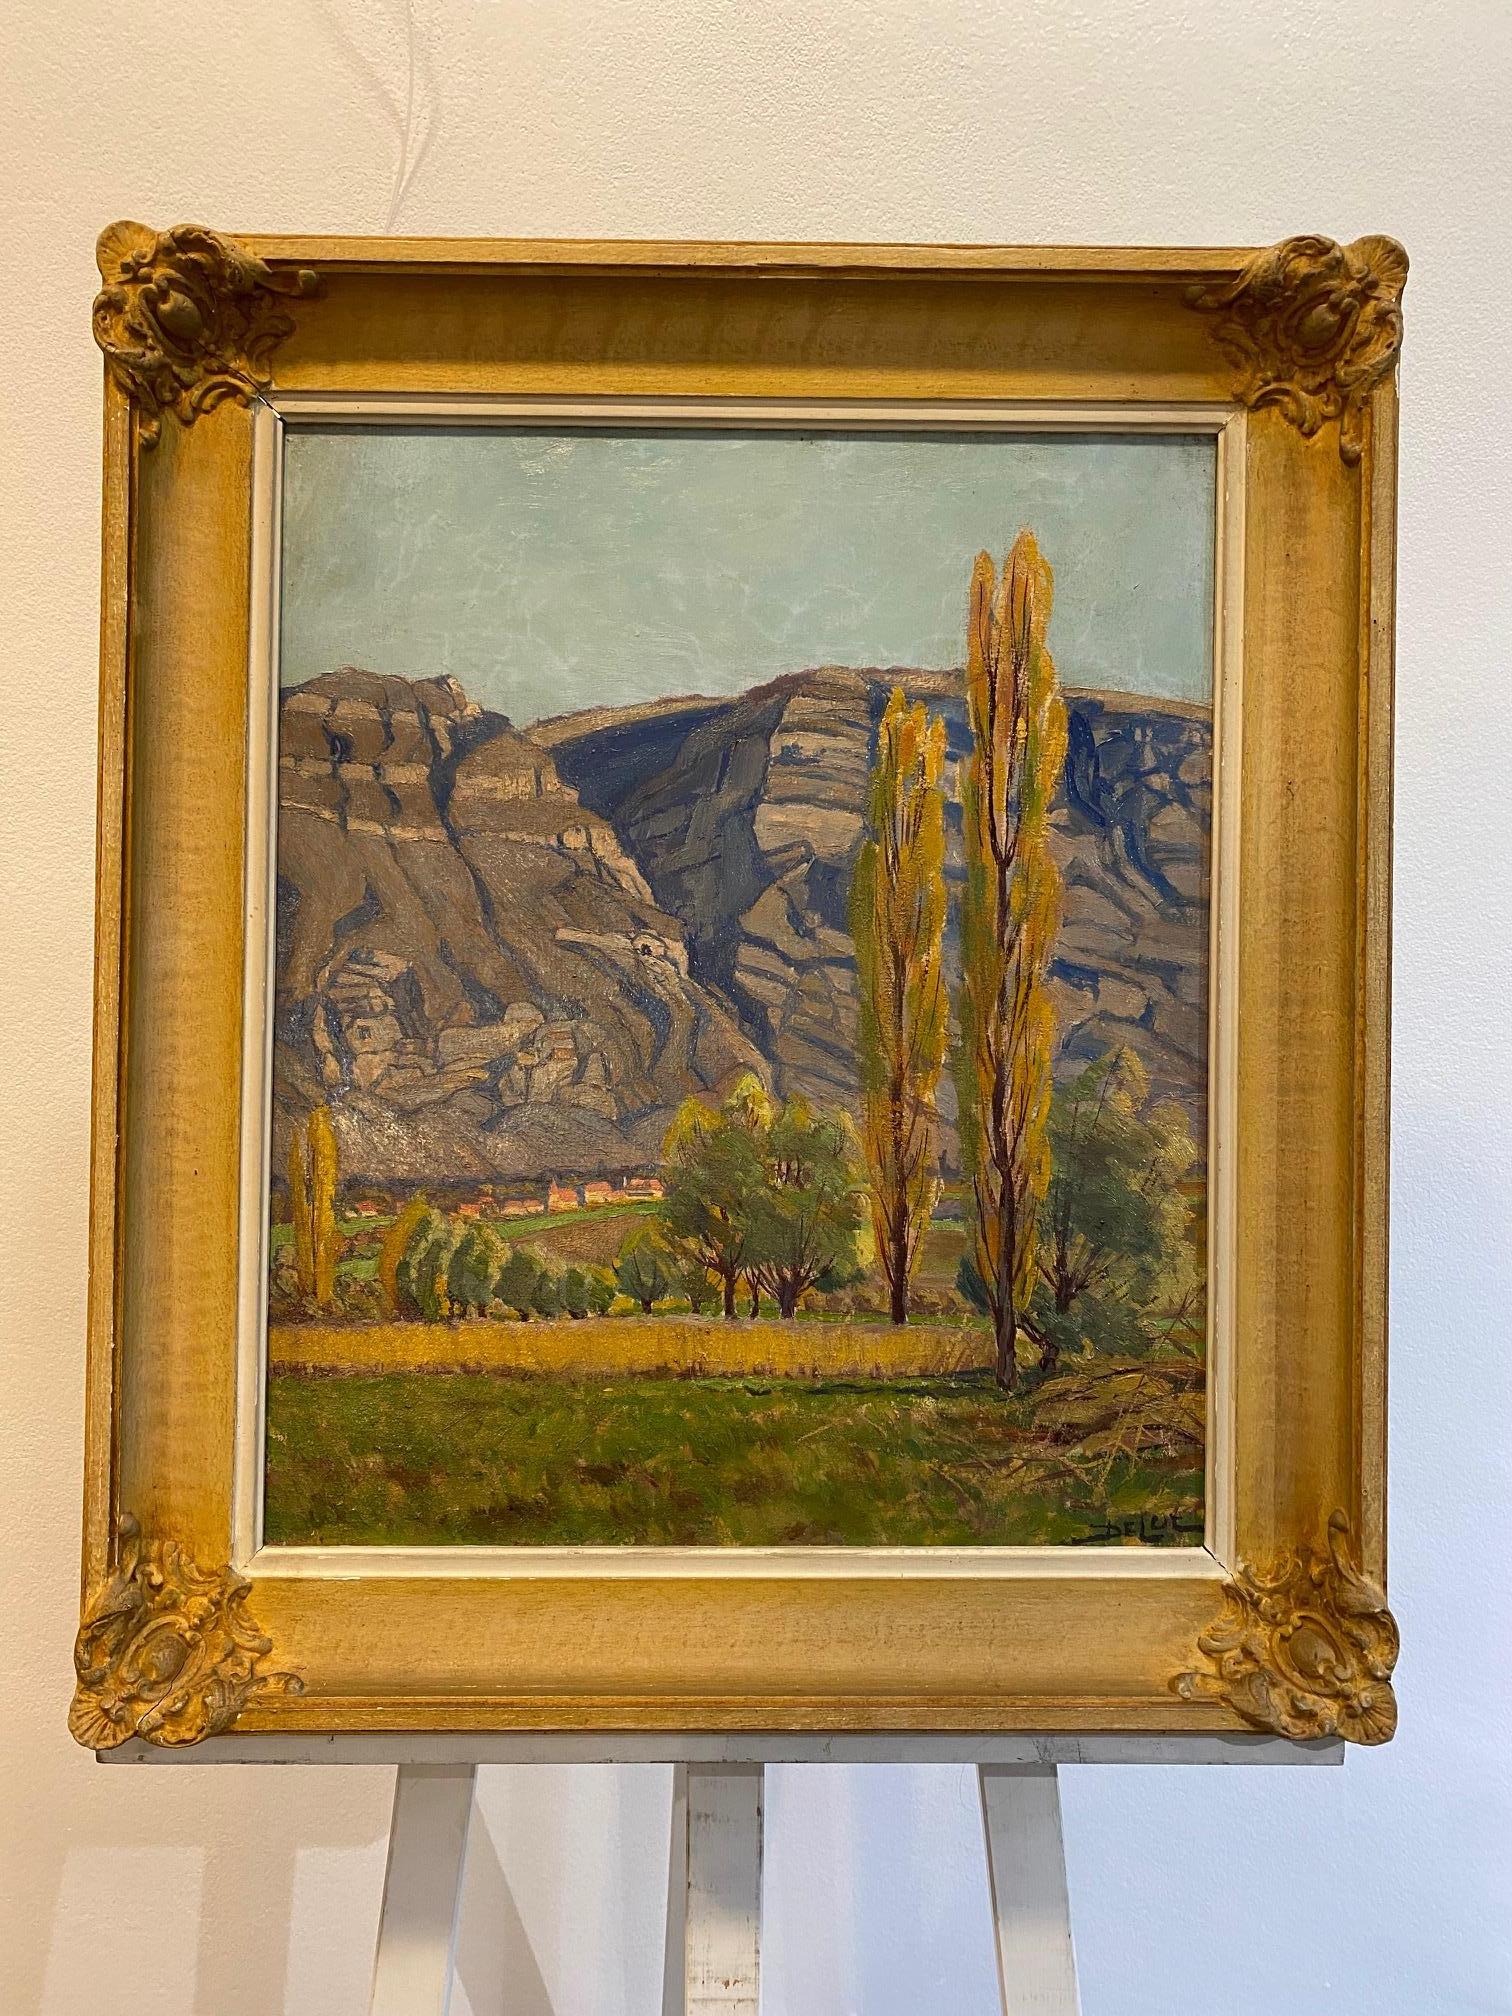 The Great gorge by John Henri Deluc - Oil on canvas 55x46 cm 3